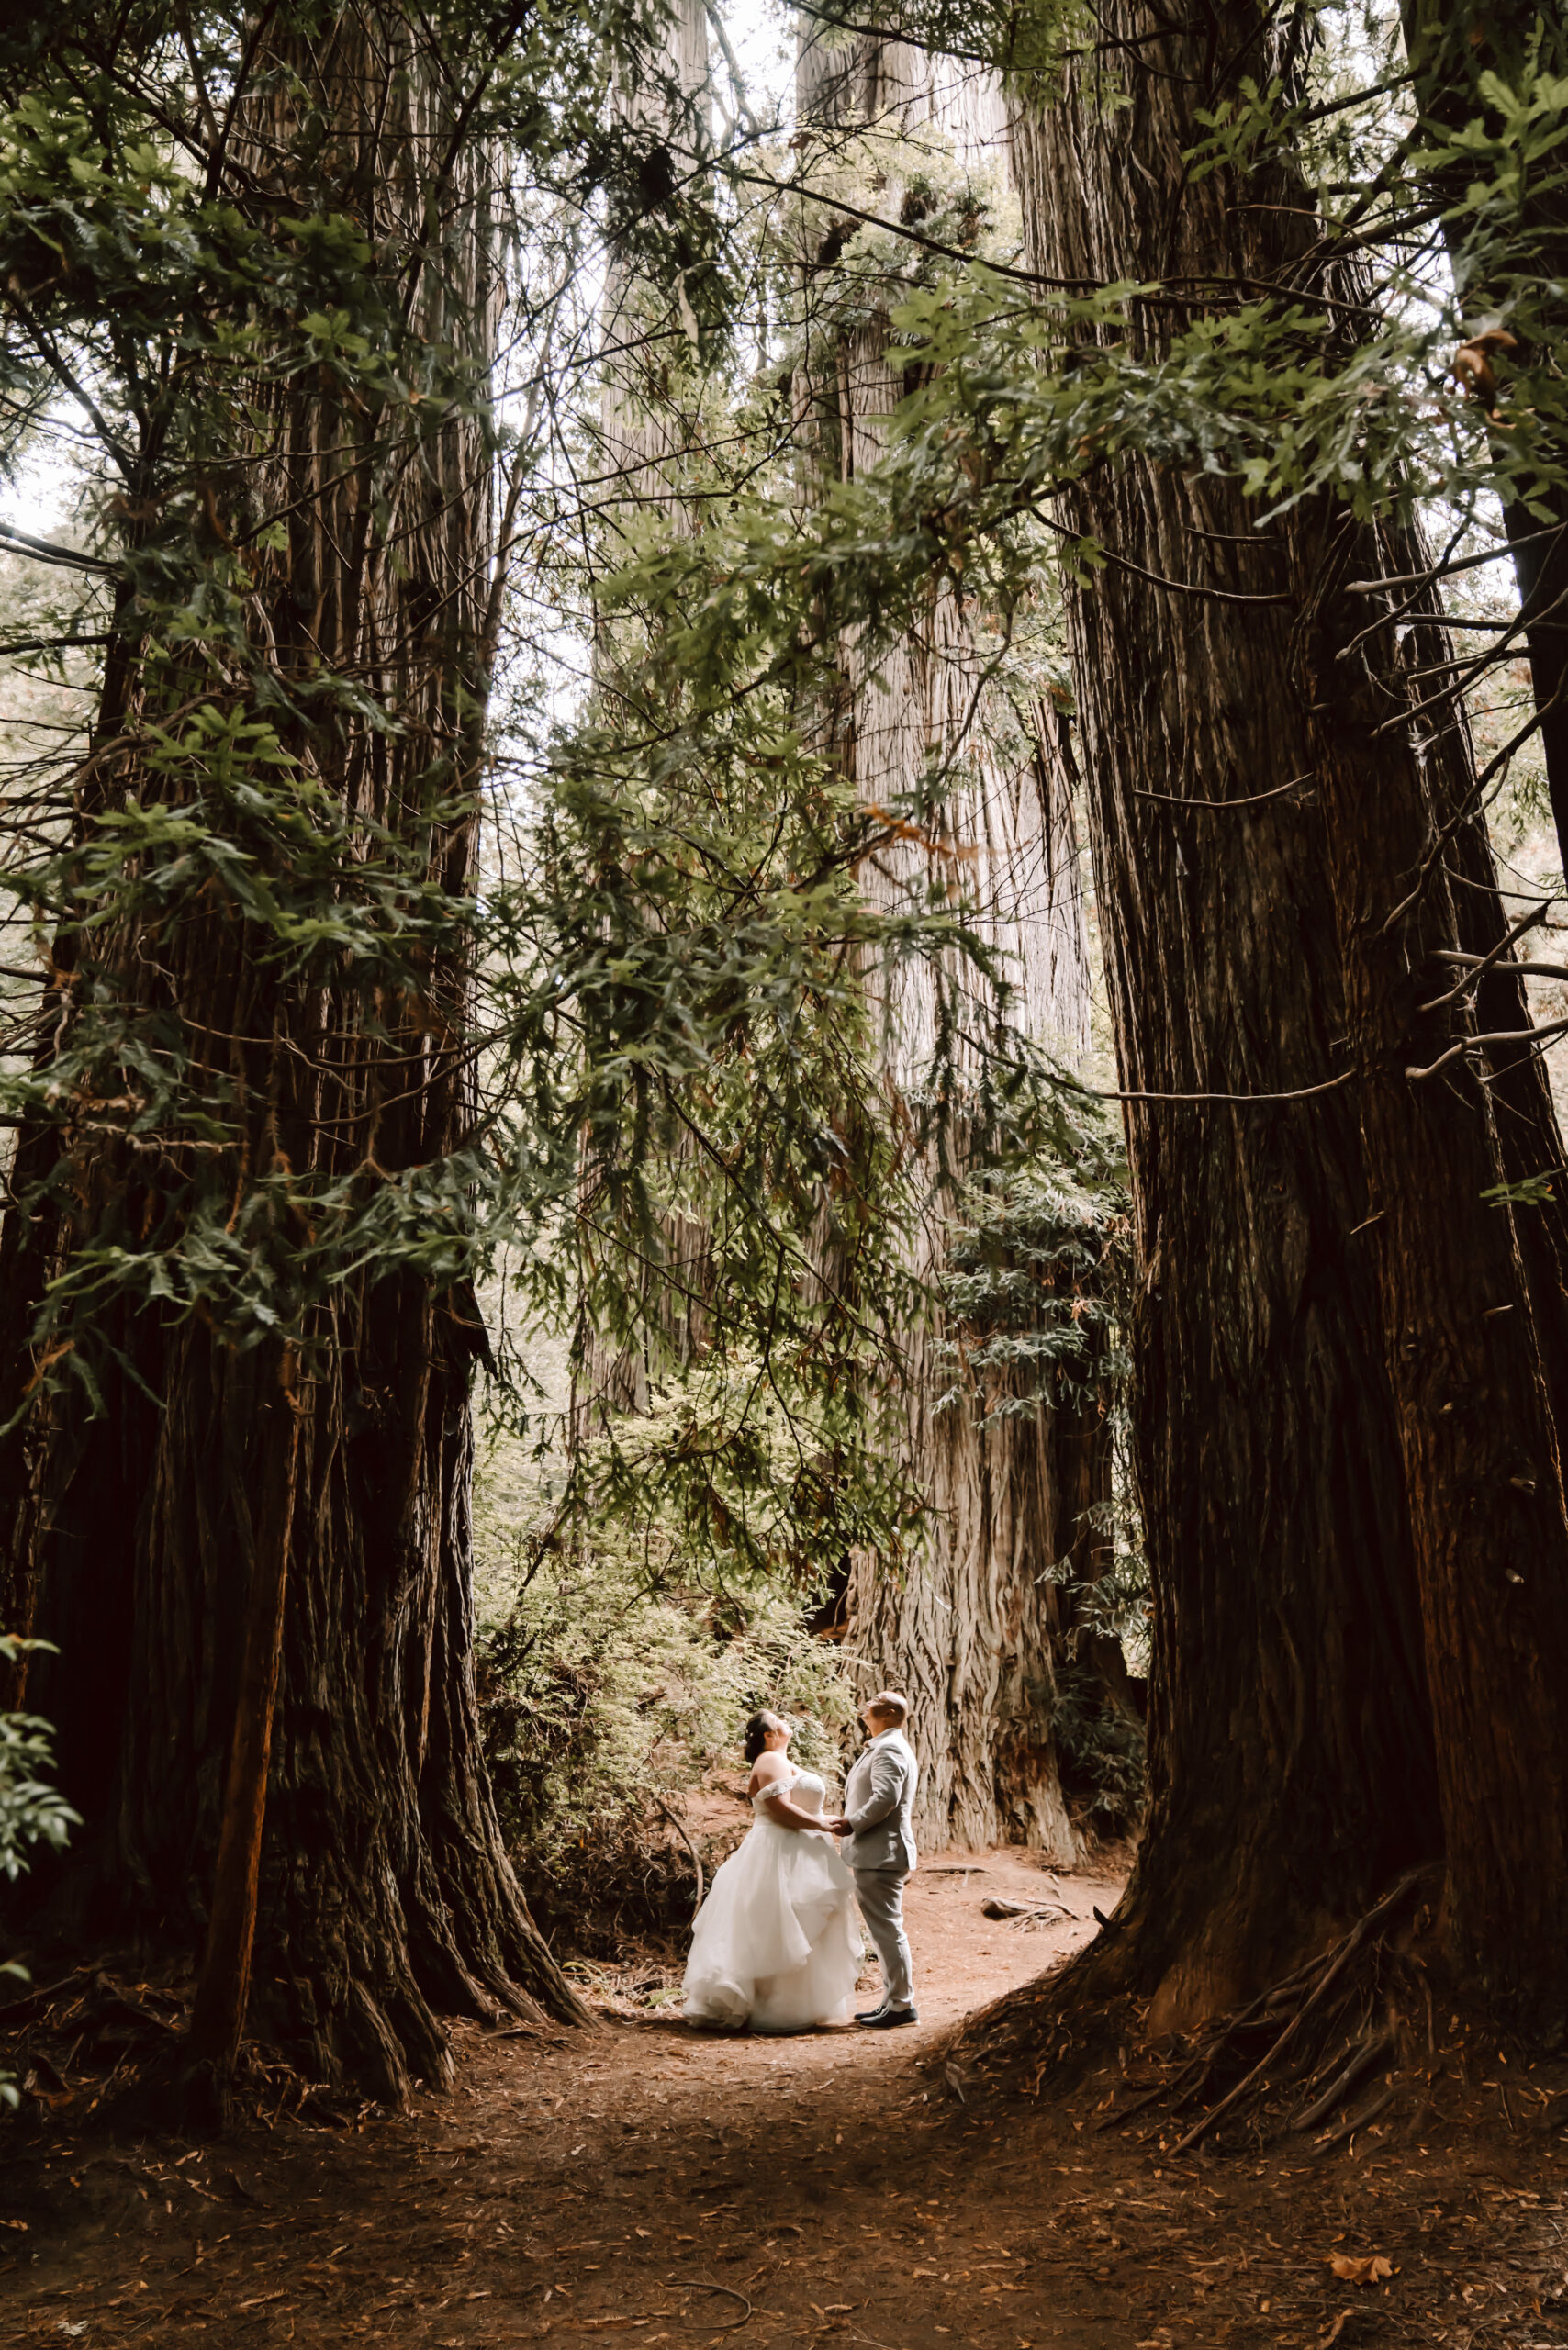 A bride and groom standing under the giant redwoods for their Elopement day